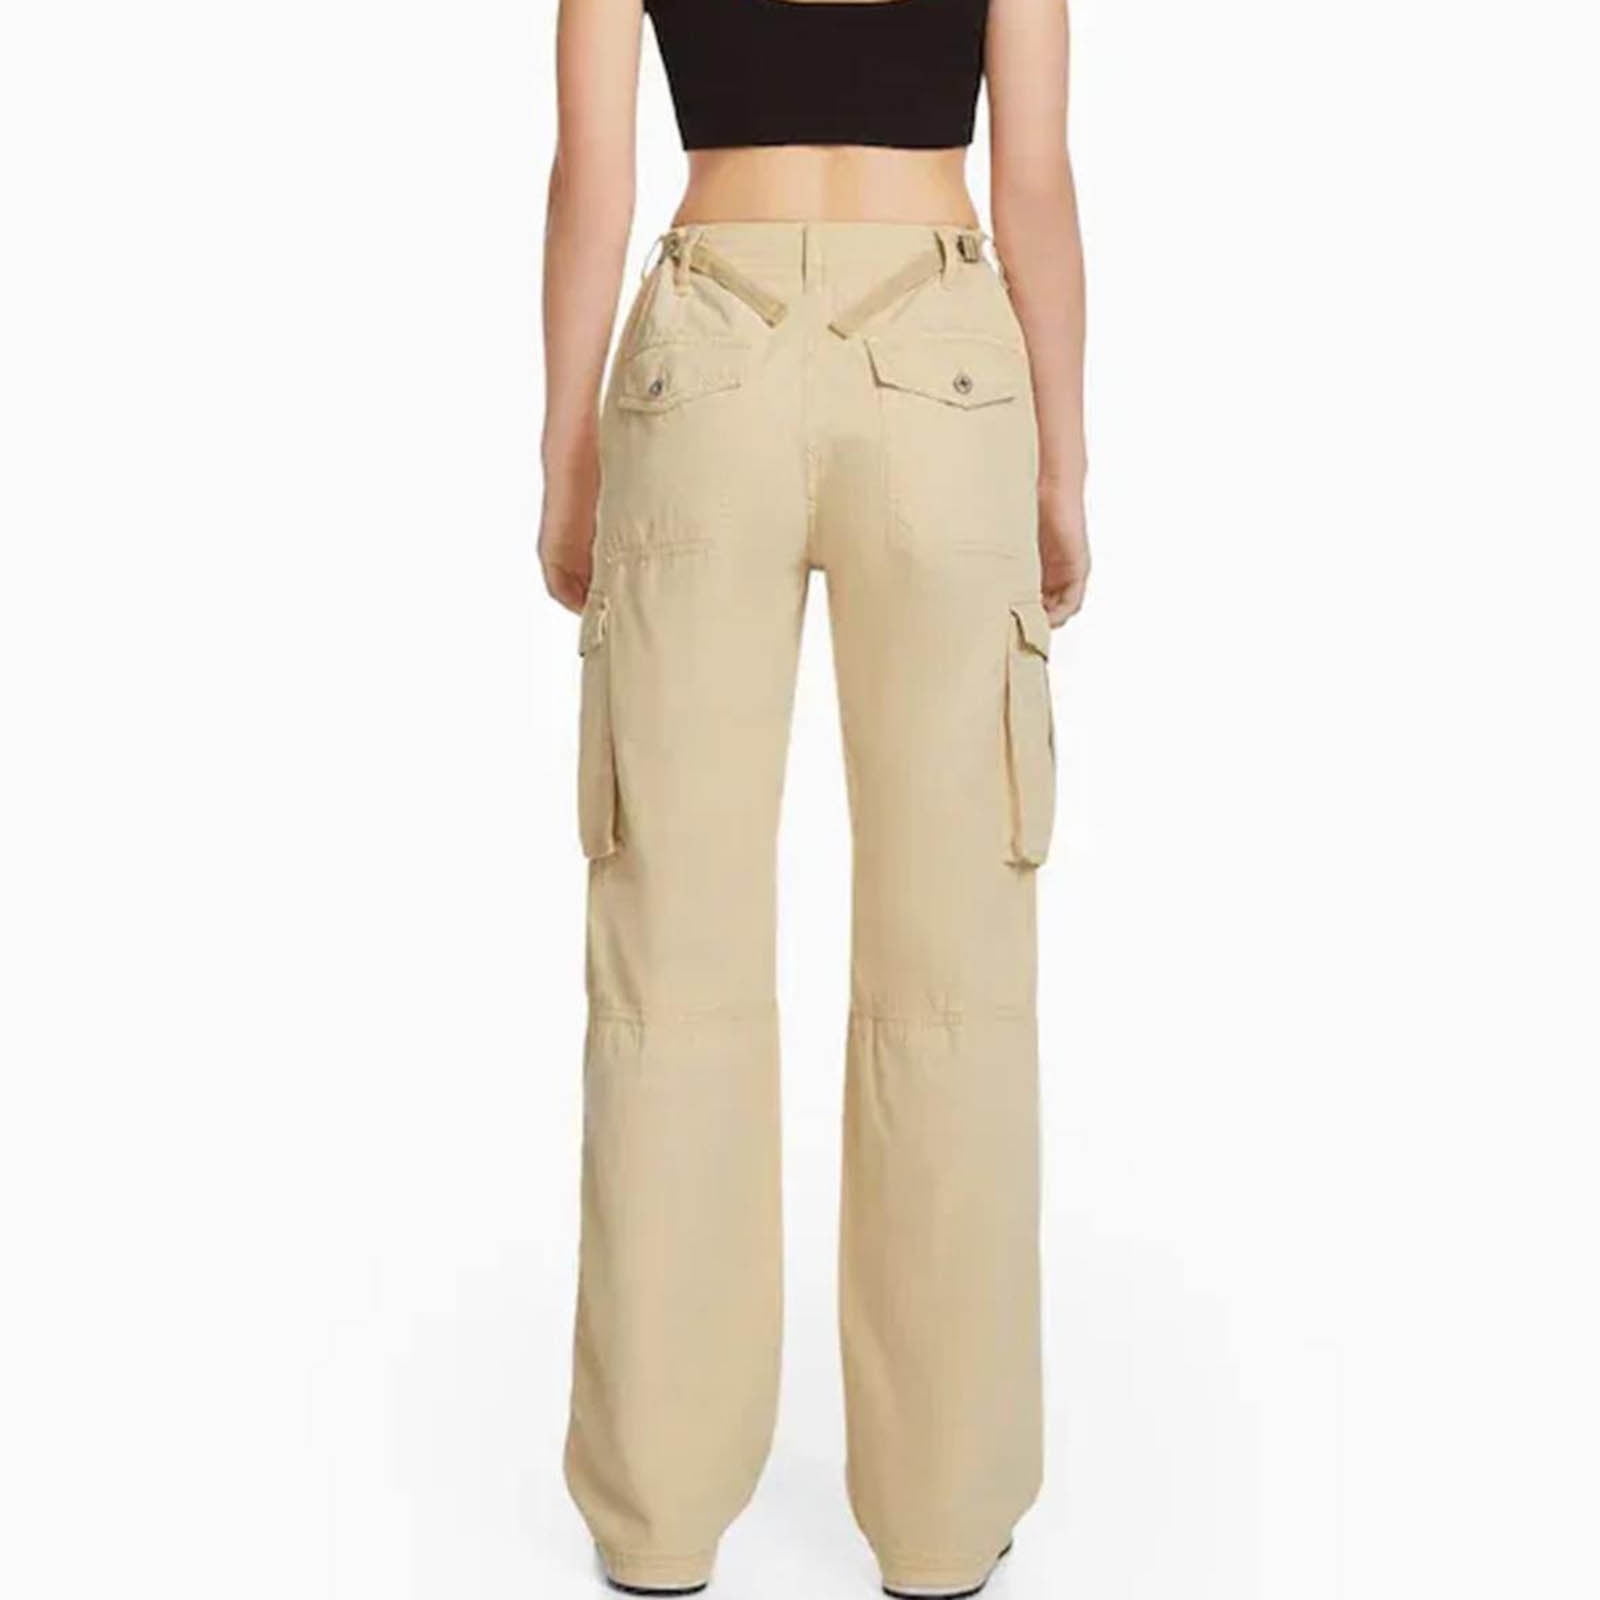 Arazooyi Womens Cargo Pants Casual Denim Beige Trousers Women For  Fashionable Ladies From Cooldh, $23.4